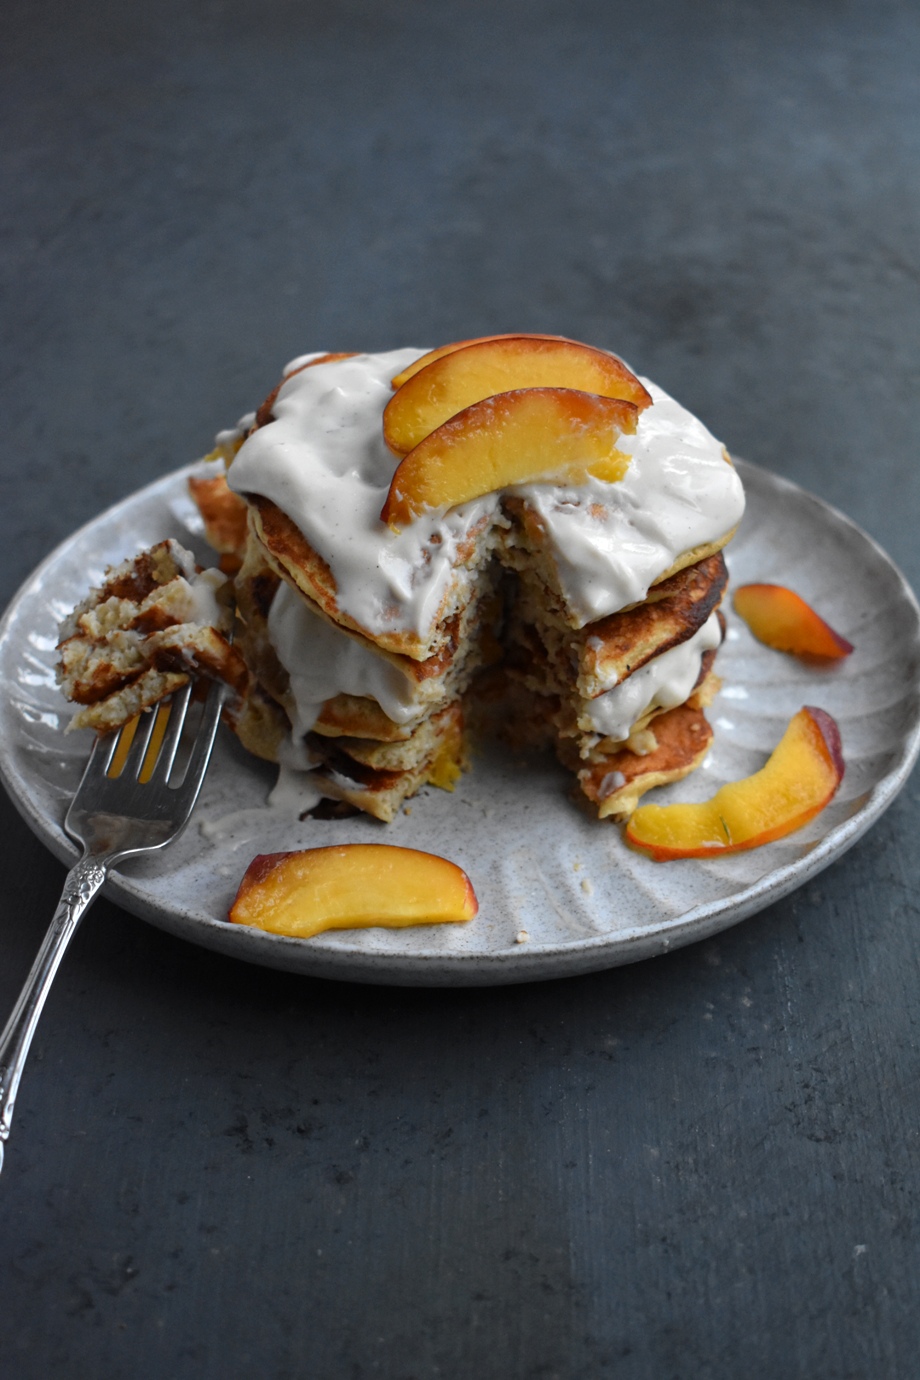 Whole-Grain Peaches and Cream Pancakes are dairy-free, whole-grain and full of delicious juicy peaches and cream. They make the perfect breakfast and a great for meal prep! www.nutritionistreviews.com